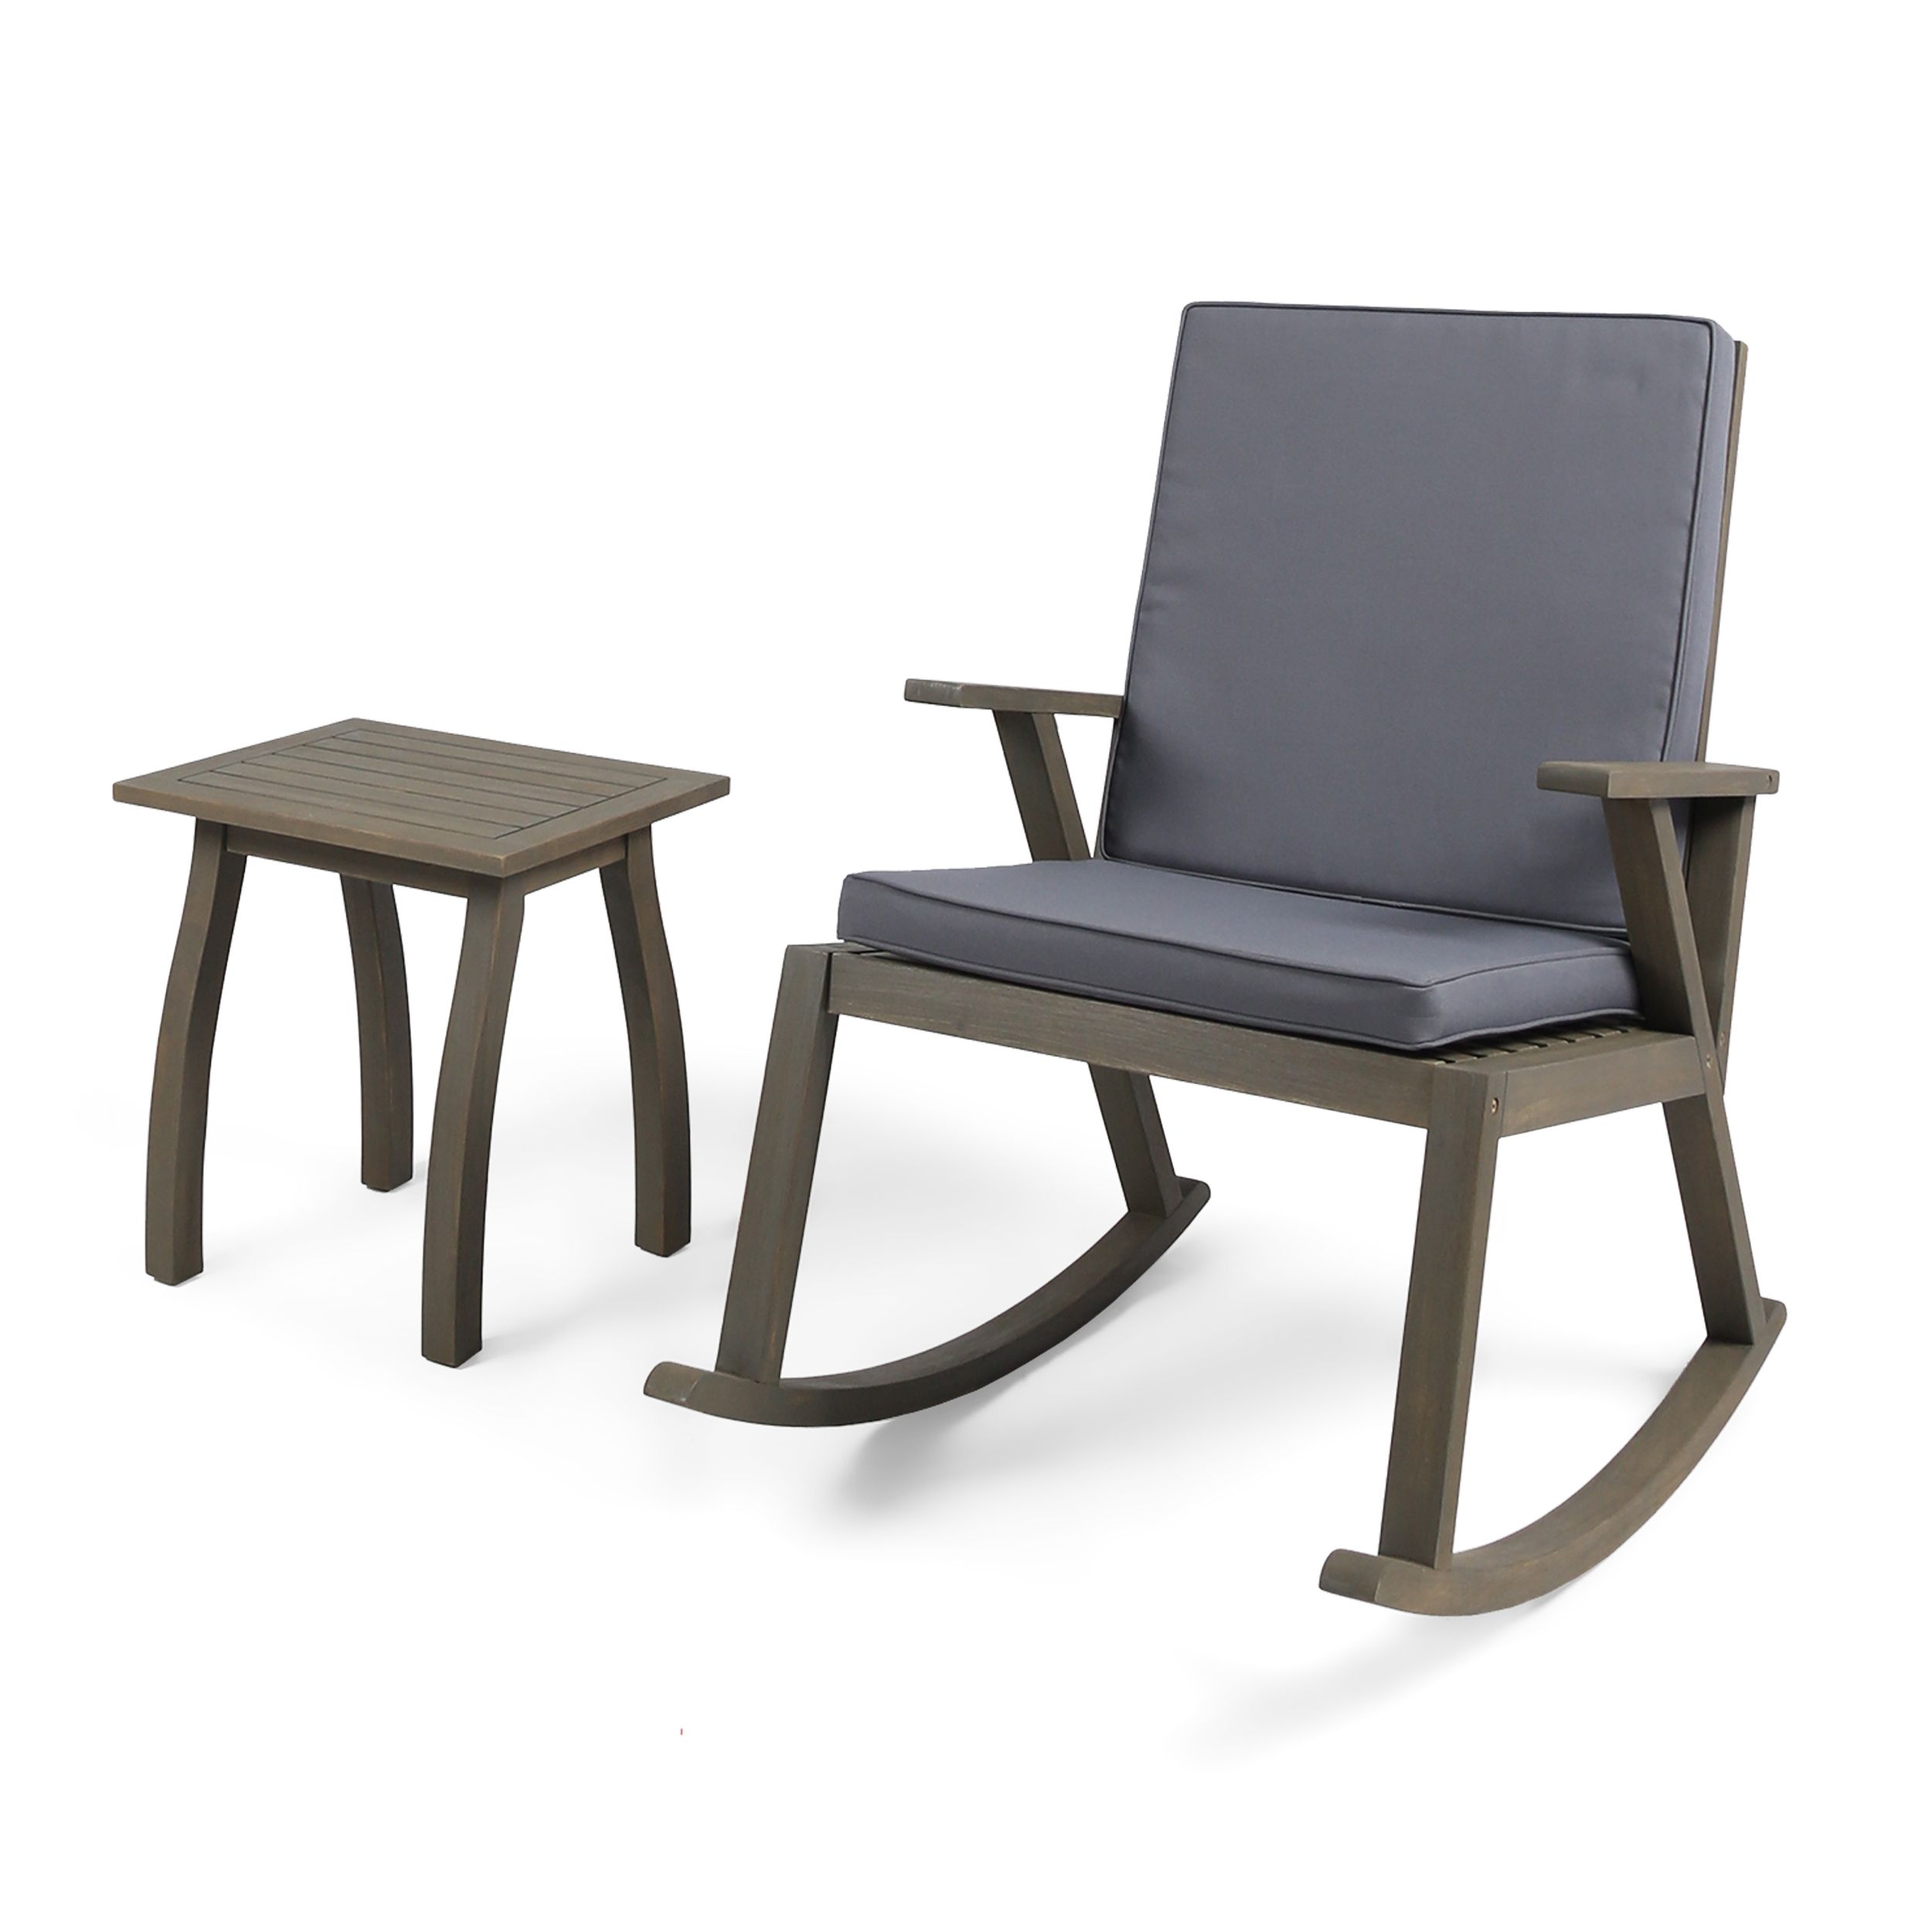 Dark Wood Outdoor Chairs Inside Preferred Brixton Outdoor Acacia Wood Rocking Chair With Side Table, Gray And (View 1 of 15)